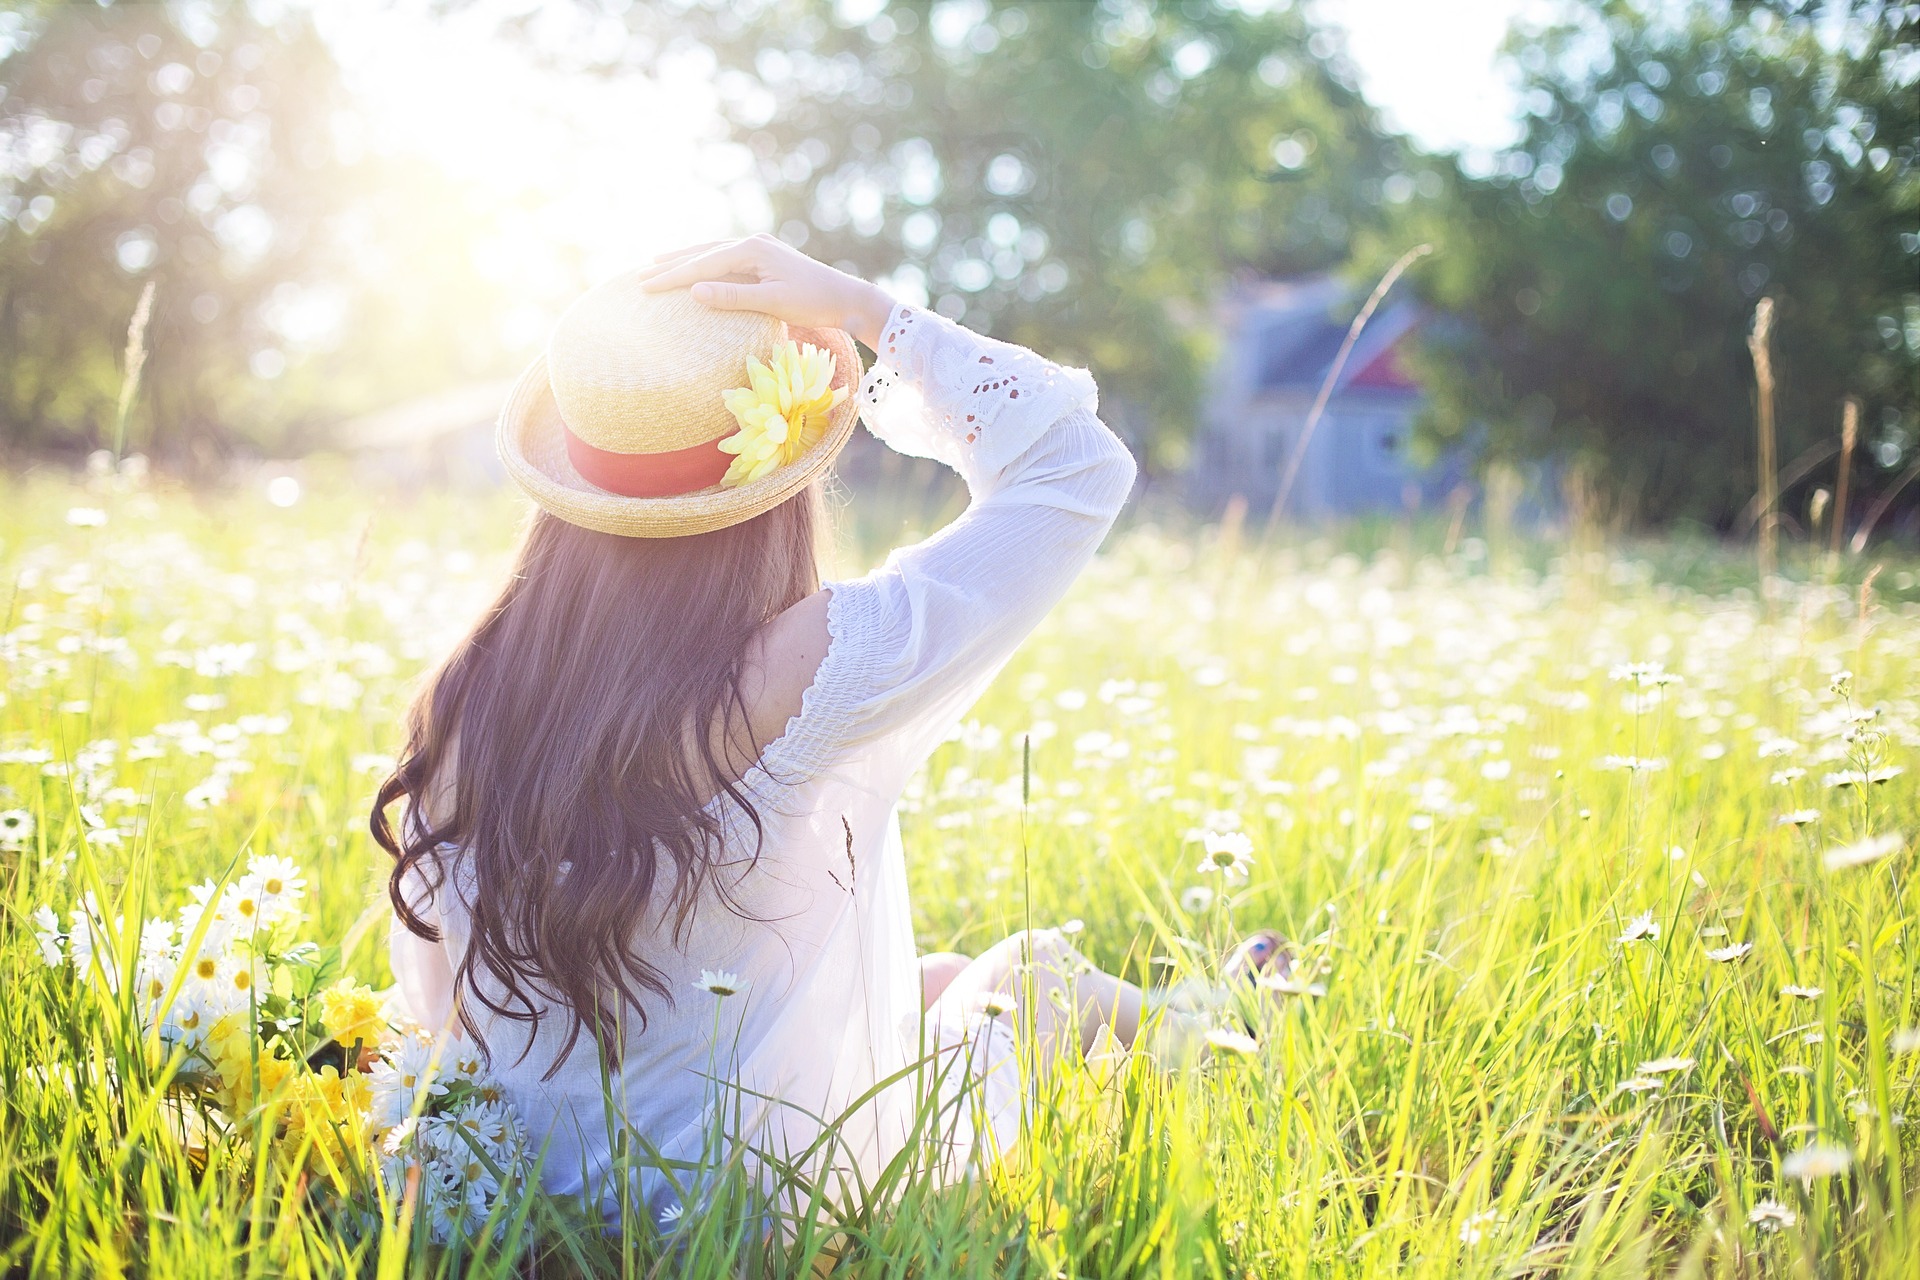 A girl sitting in a field on a sunny day